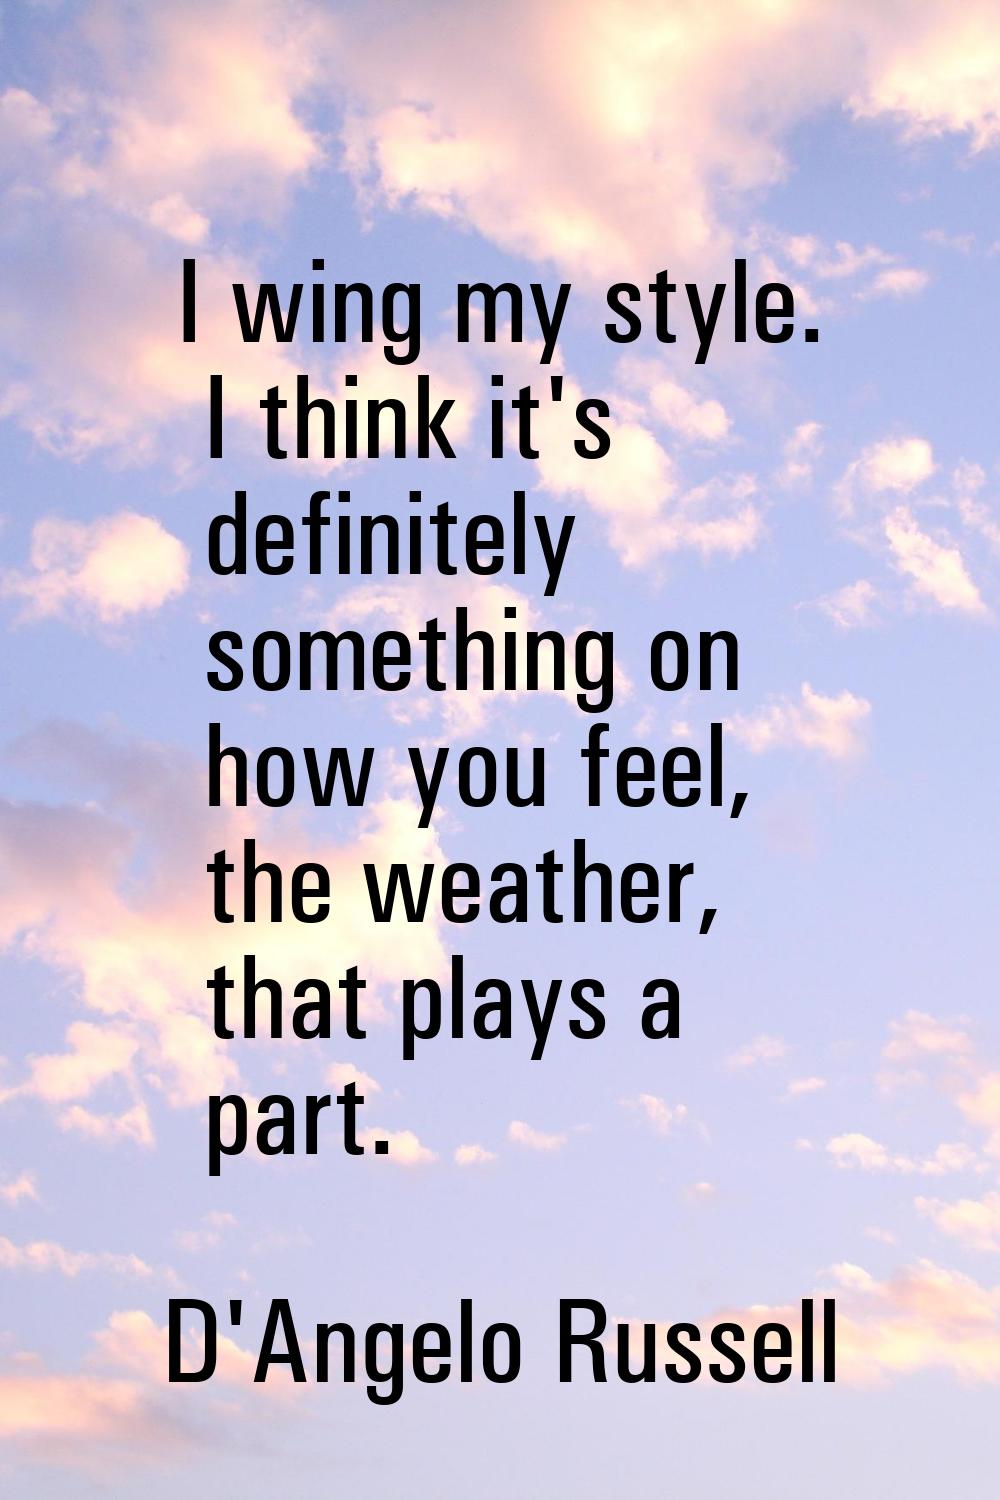 I wing my style. I think it's definitely something on how you feel, the weather, that plays a part.